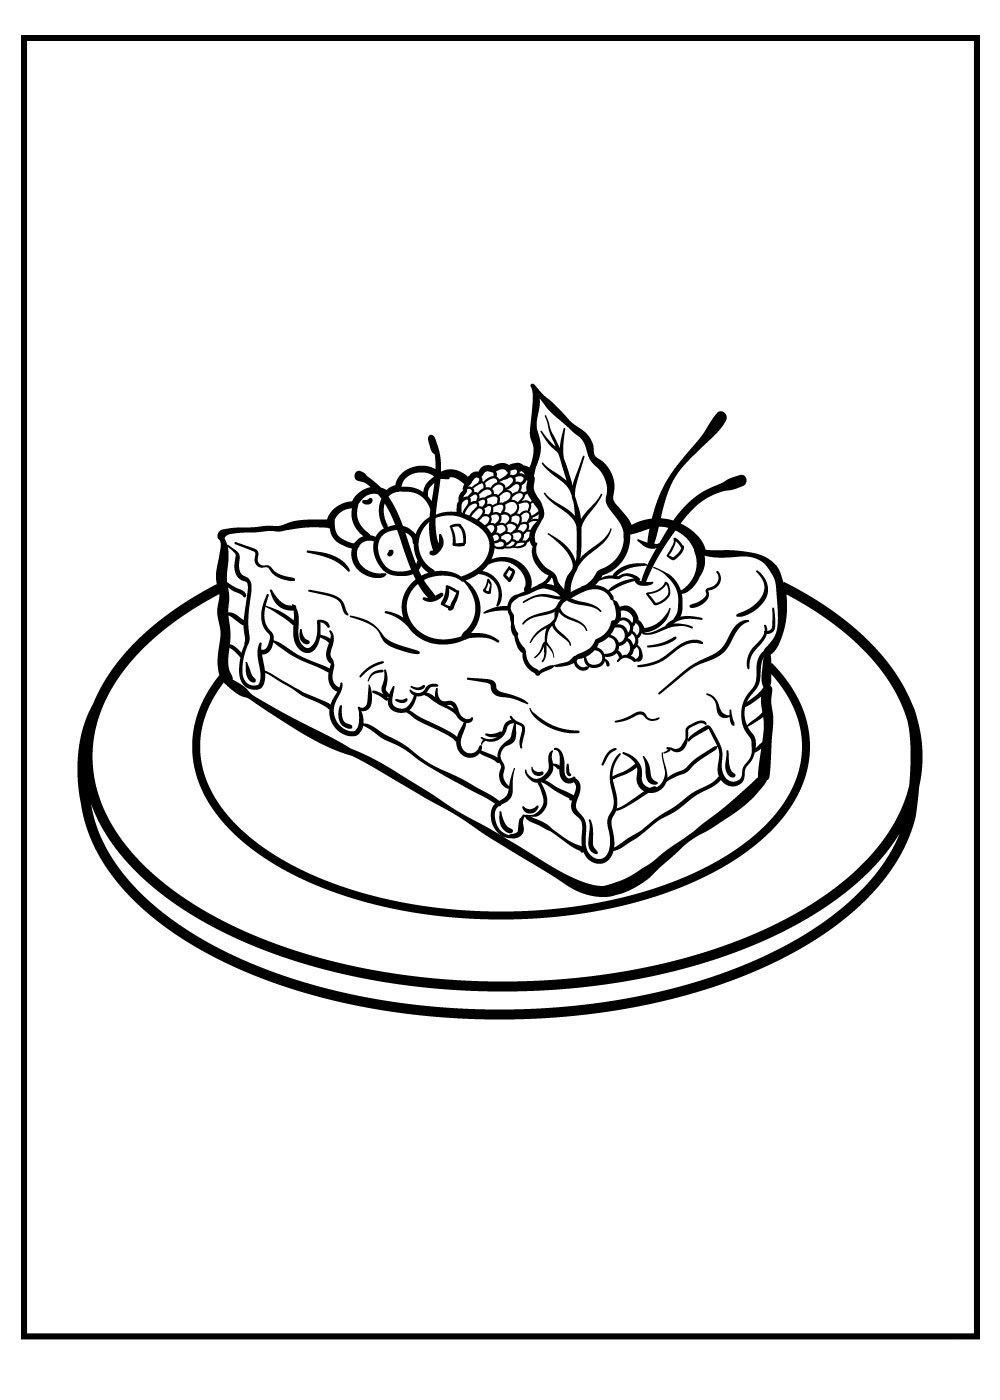 Delicious Birthday Cake Piece On Place Coloring Page